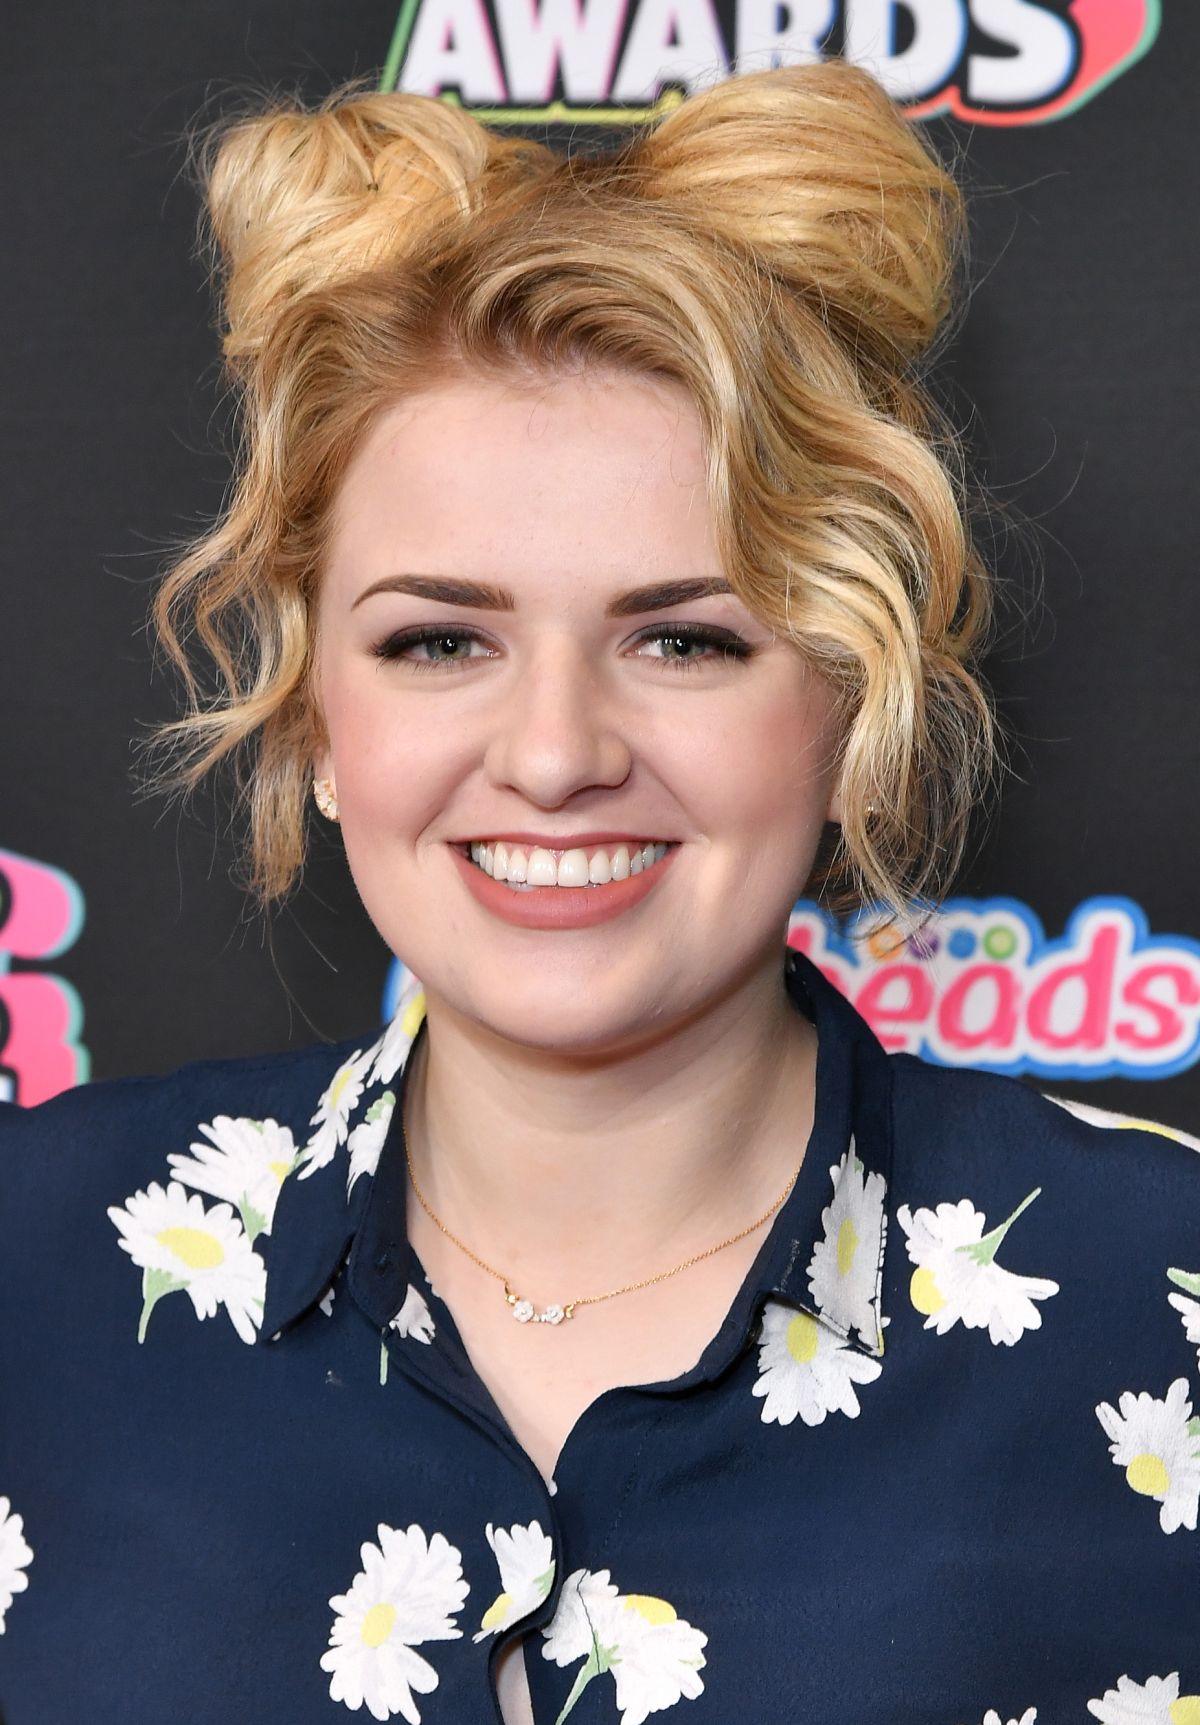 http://www.hawtcelebs.com/wp-content/uploads/2018/06/maddie-poppe-at-radio-disney-music-awards-2018-in-los-angeles-06-22-2018-12.jpg